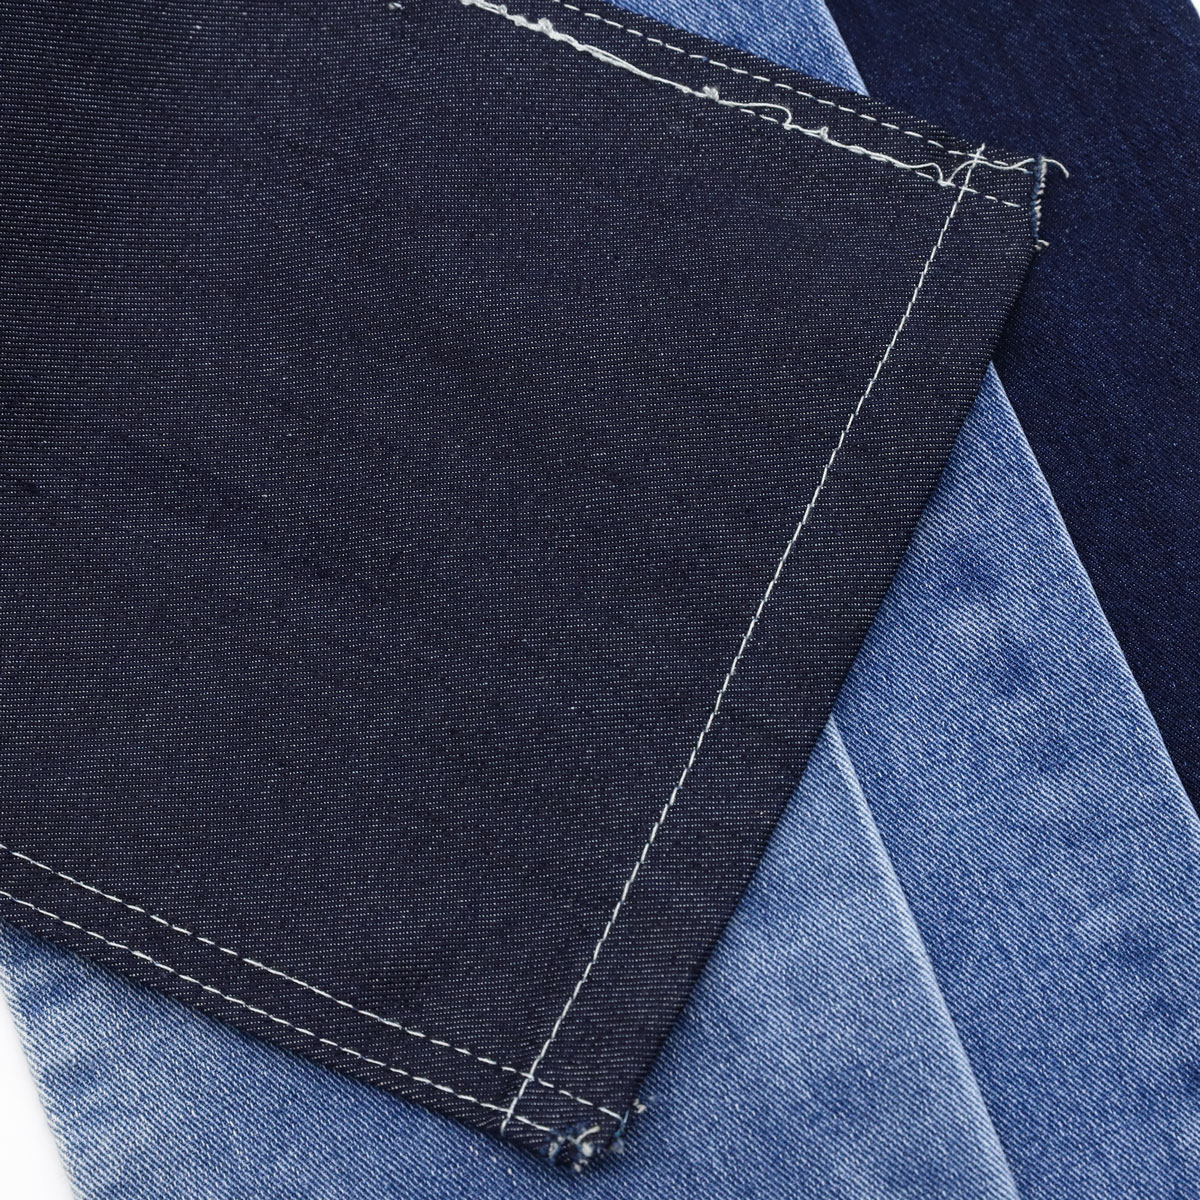 Discover the Stylish New Look of Non-stretch Denim Fabric 1